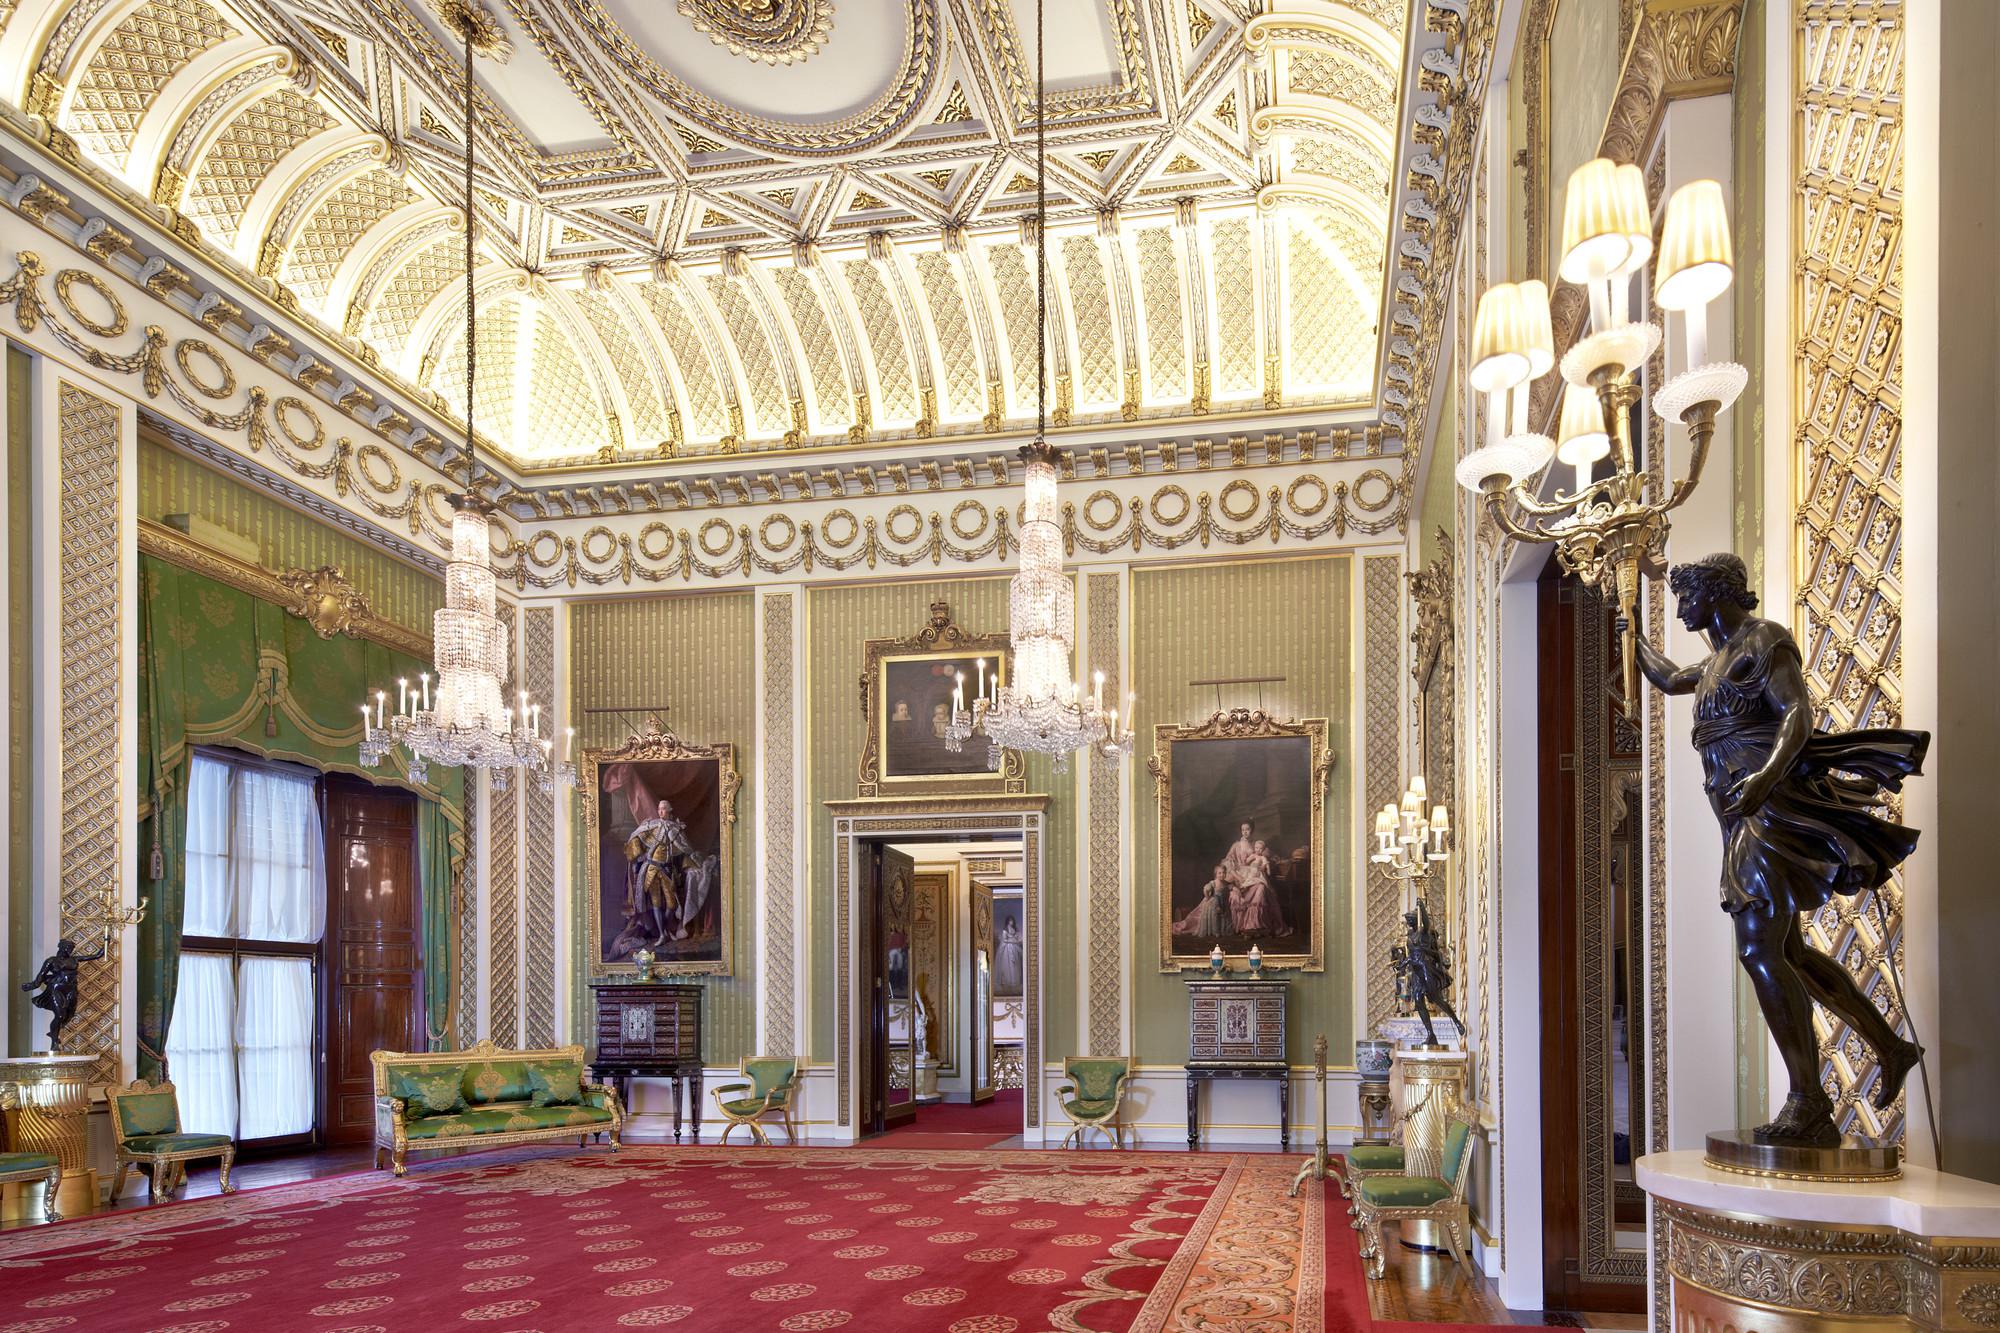 The Green Drawing Room at Buckingham Palace (Photo credit: Royal Collection Trust / © Her Majesty Queen Elizabeth II 2021. Photographer: Peter Smith)